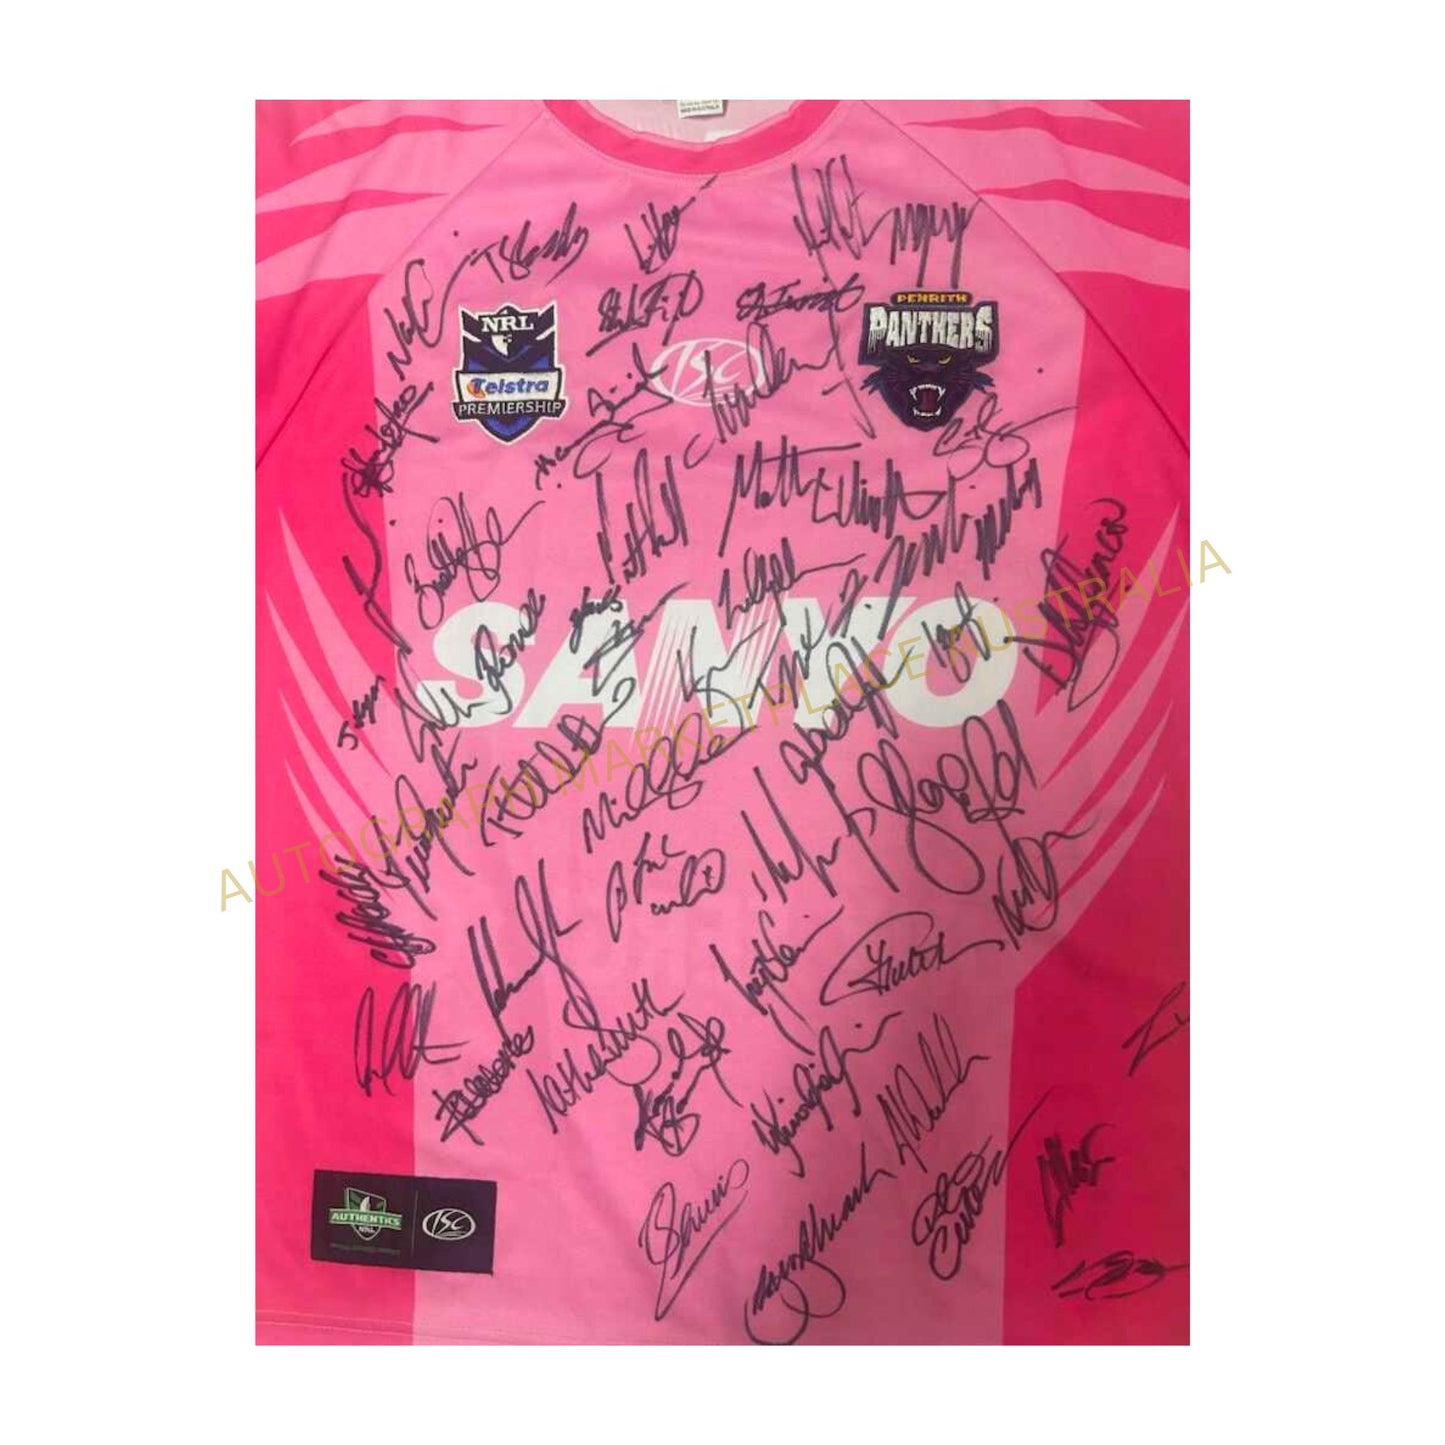 Penrith Panthers First Edition Genuine "Women in League" Legends Signed Jersey